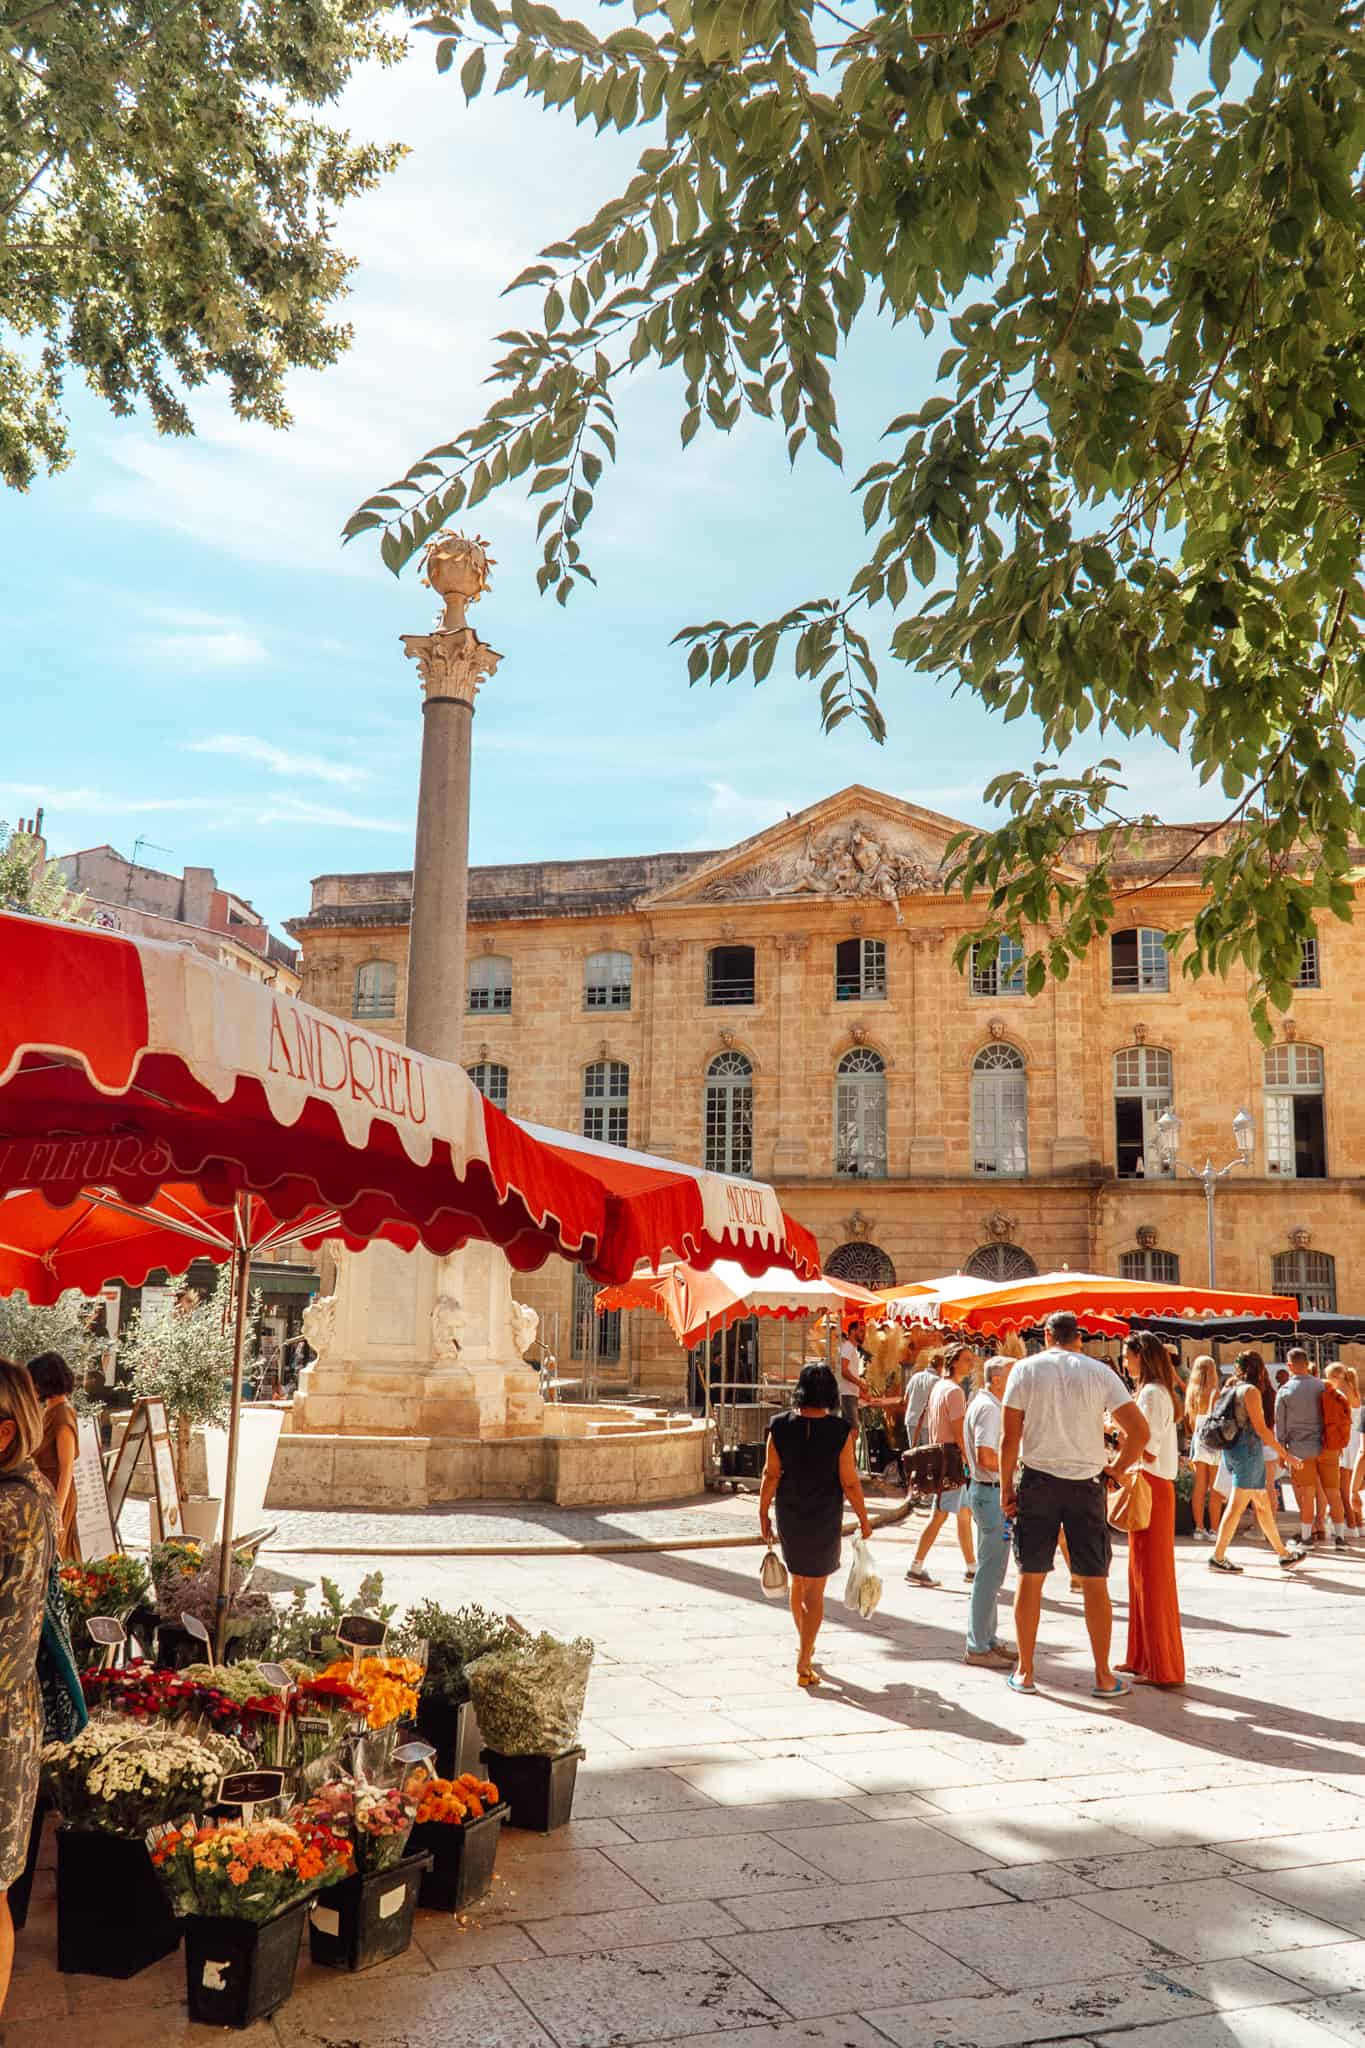 Town square in Aix-en-Provence